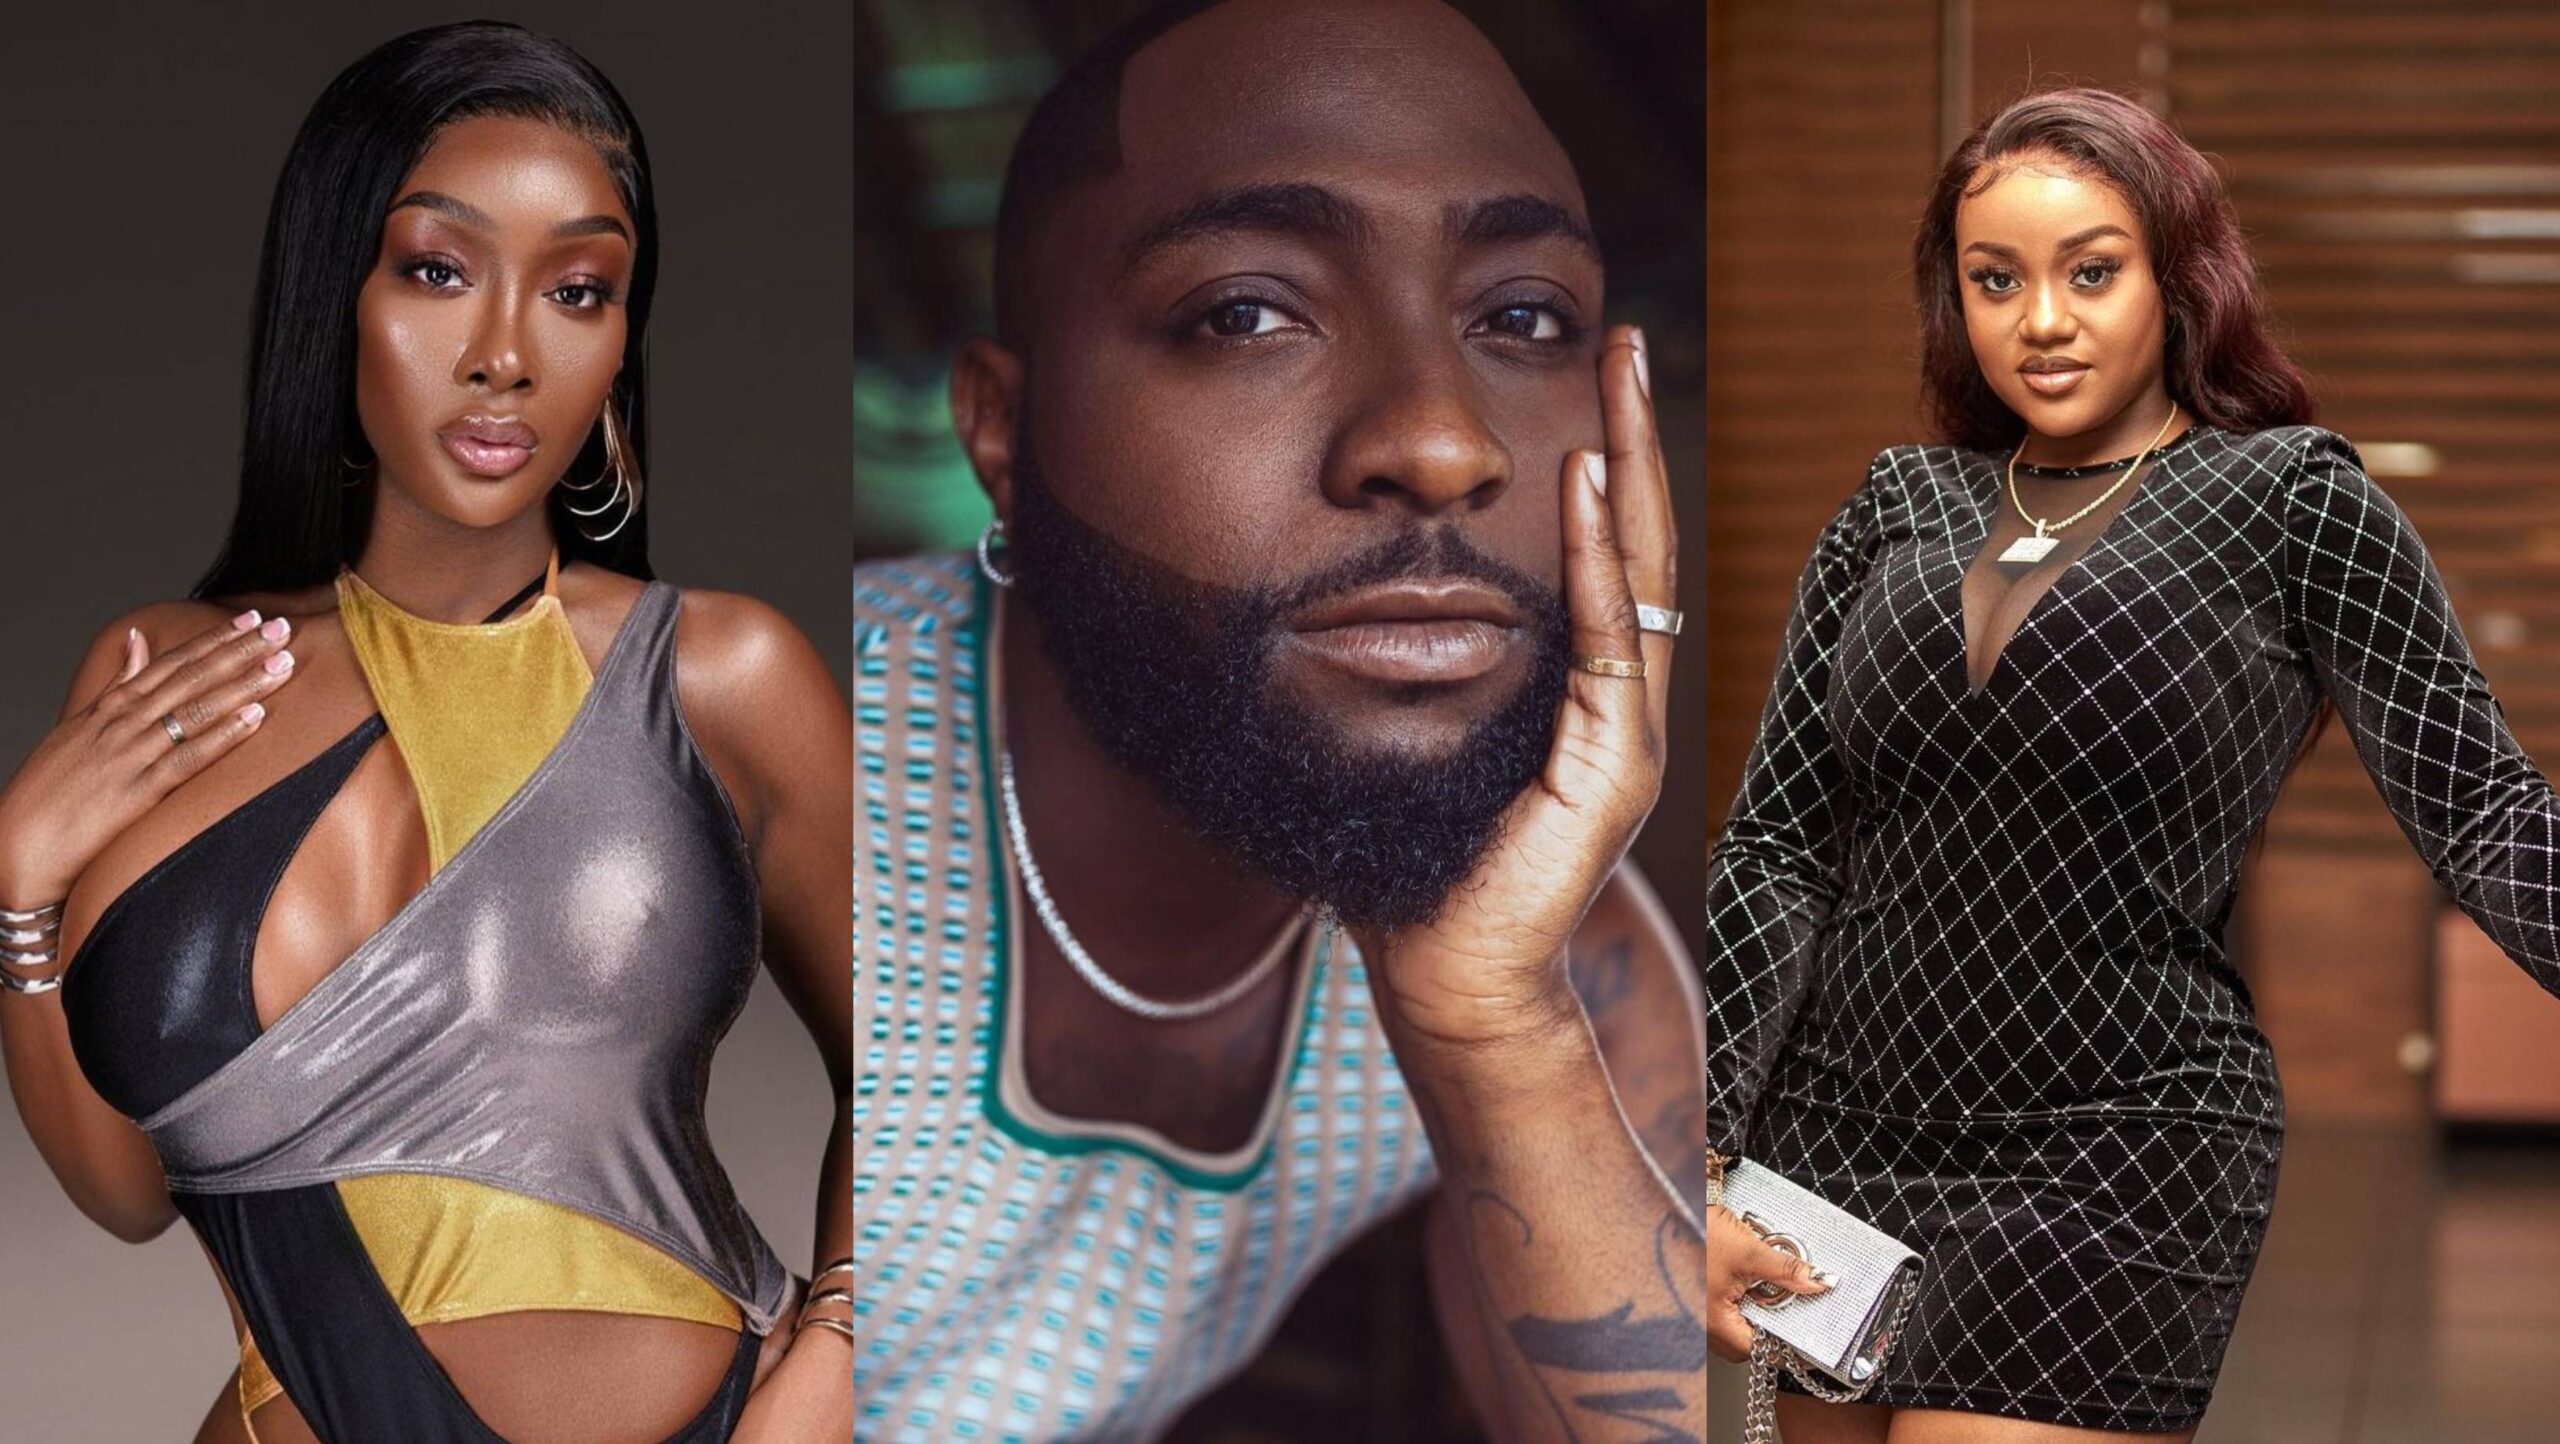 Chioma had series of Abortions for him before they had a son- Anita continues to drag Davido on social media